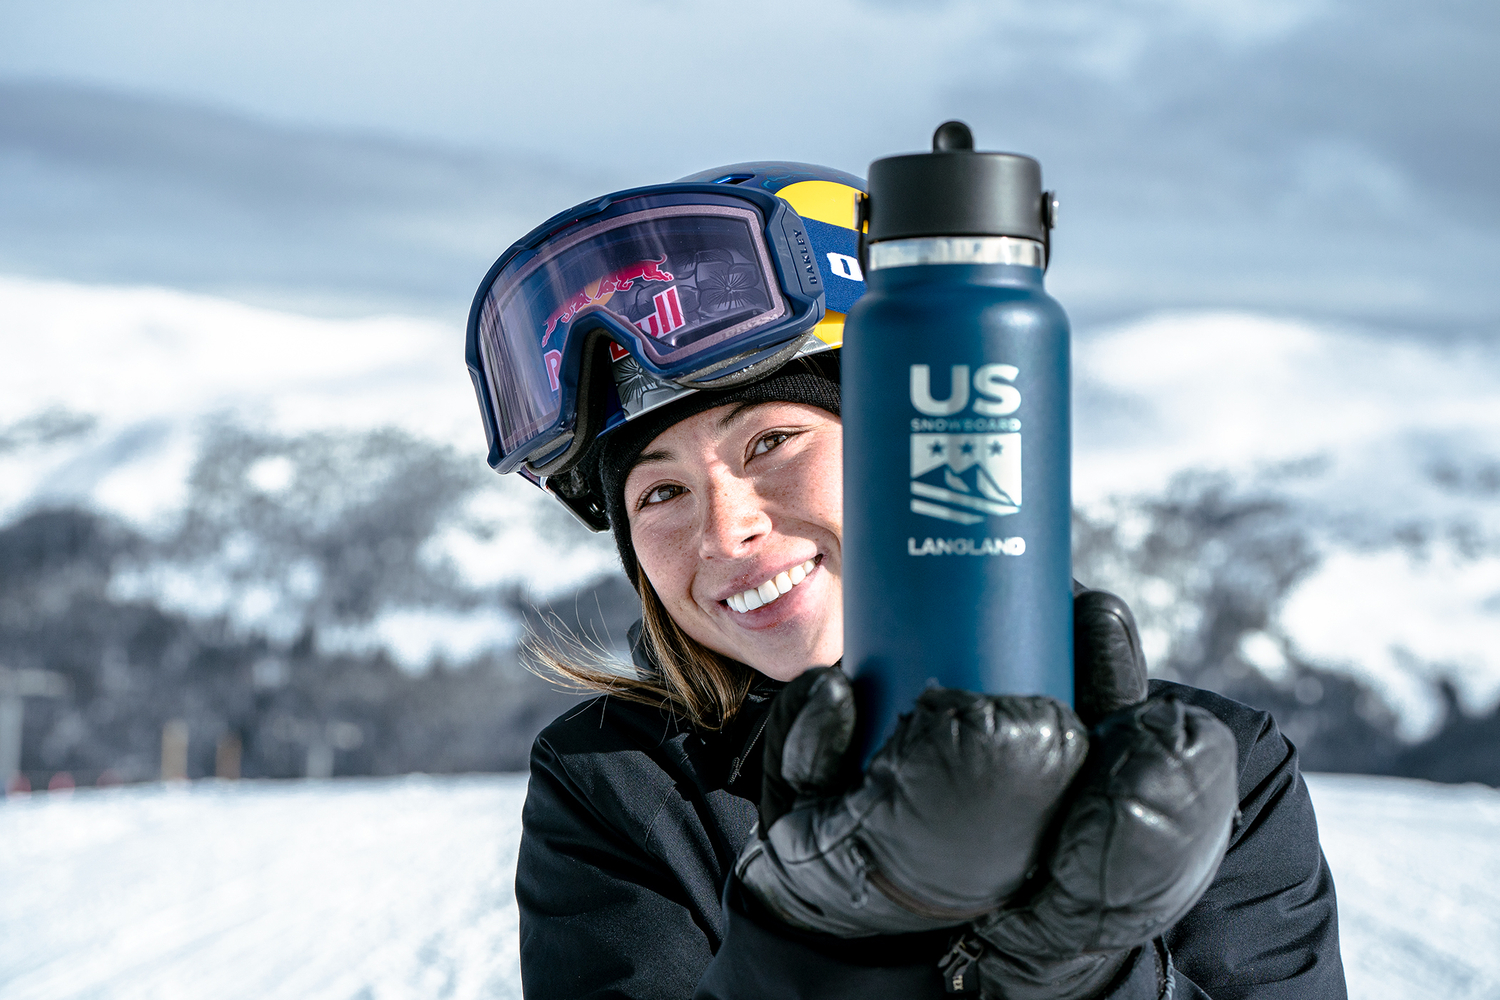 BIG AIR WITH HYDRO FLASK AND US SNOWBOARD TEAM 